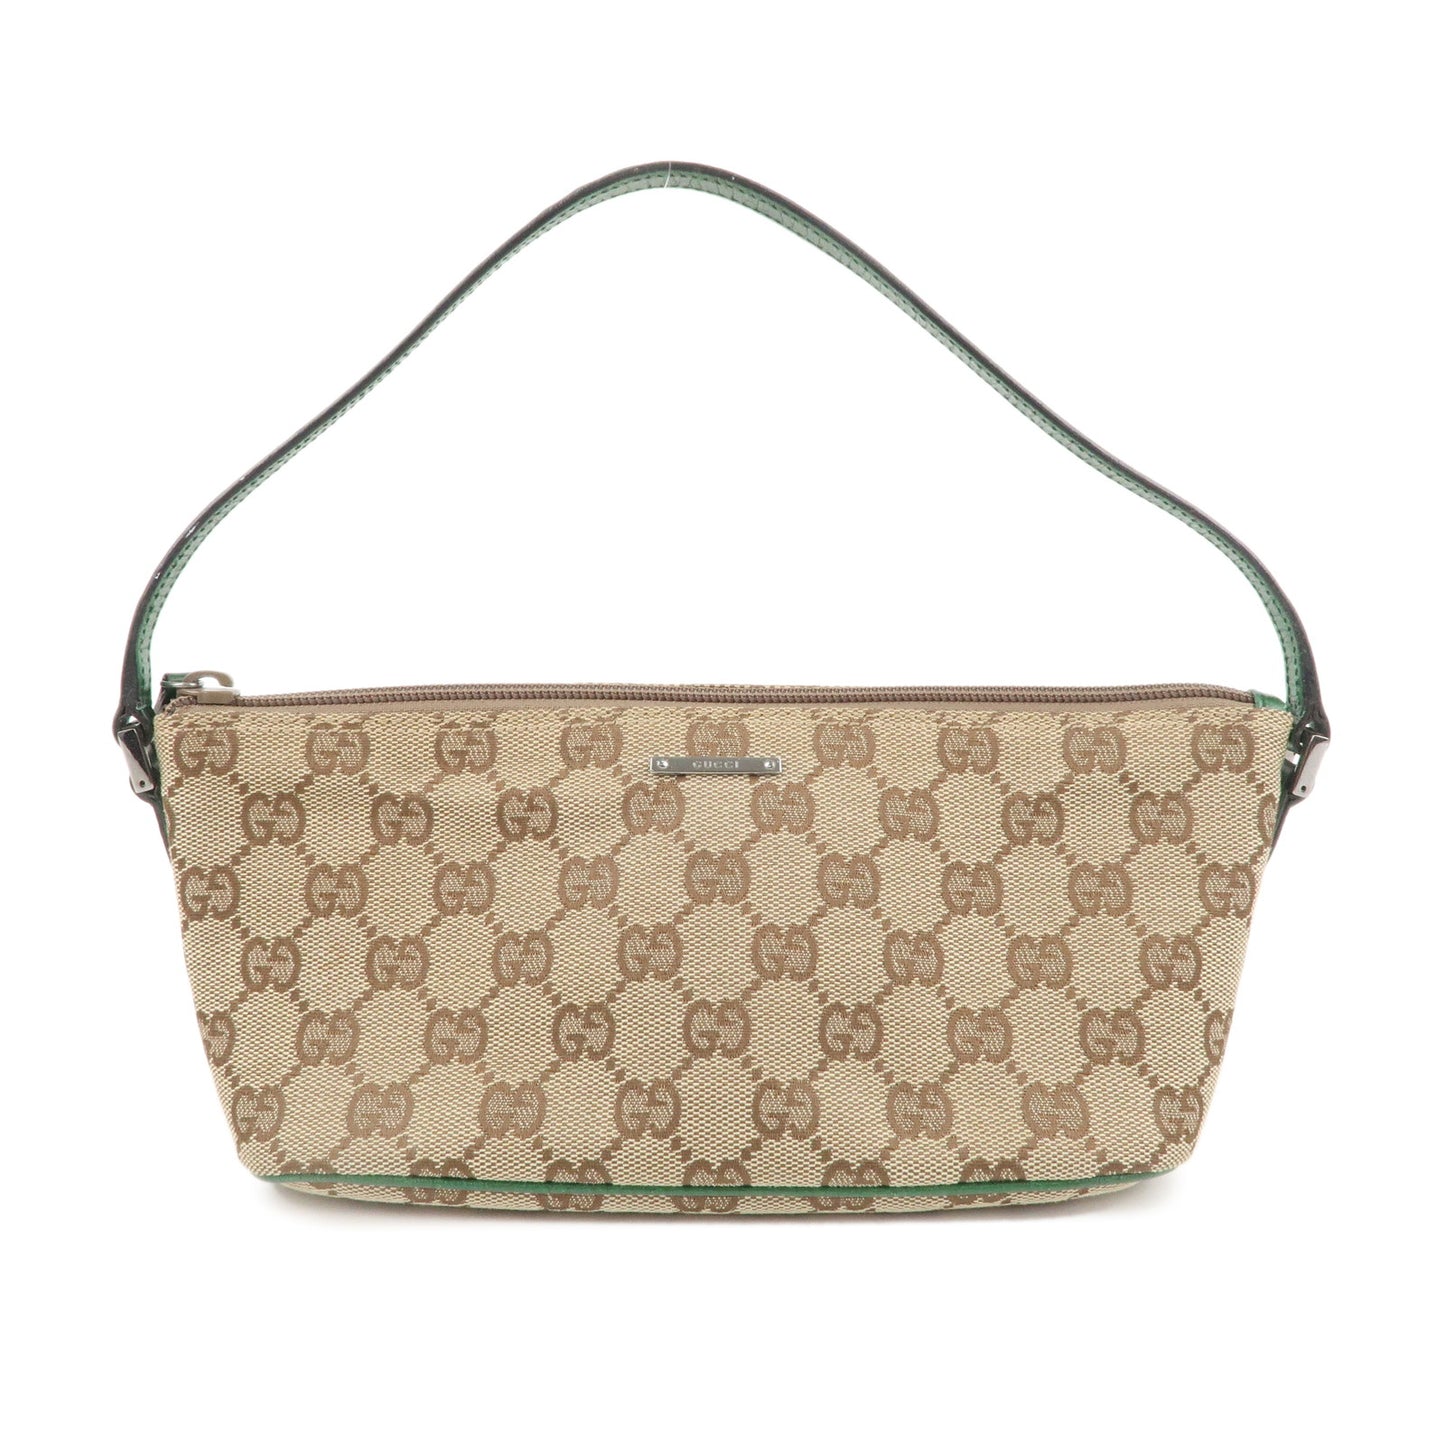 GUCCI-Boat-Bag-GG-Canvas-Leather-Bag-Pouch-Beige-Brown-Green-7198